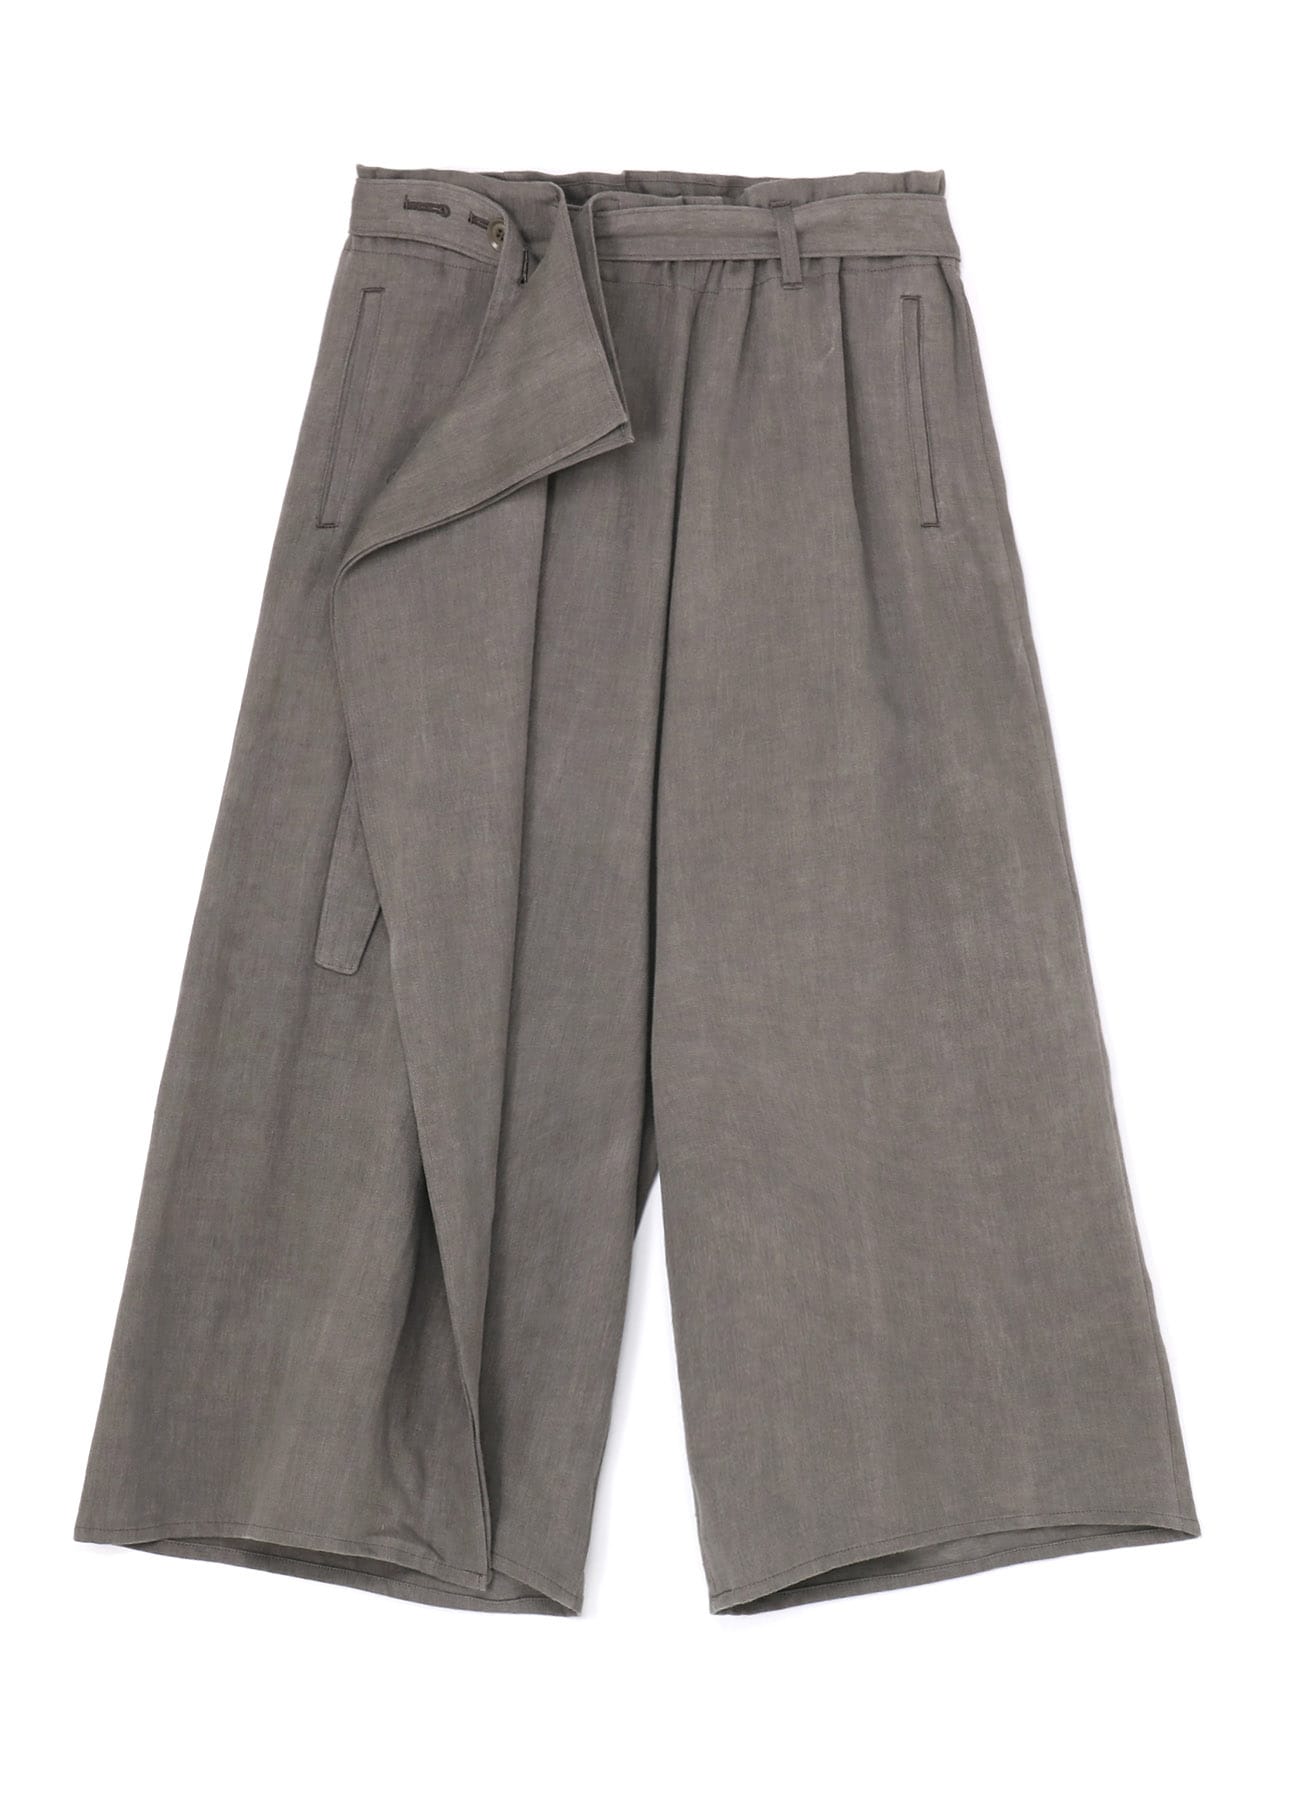 L/C INK DYED HEAVY DENIM BELTED PANTS(XS Grey): Y's｜THE SHOP 